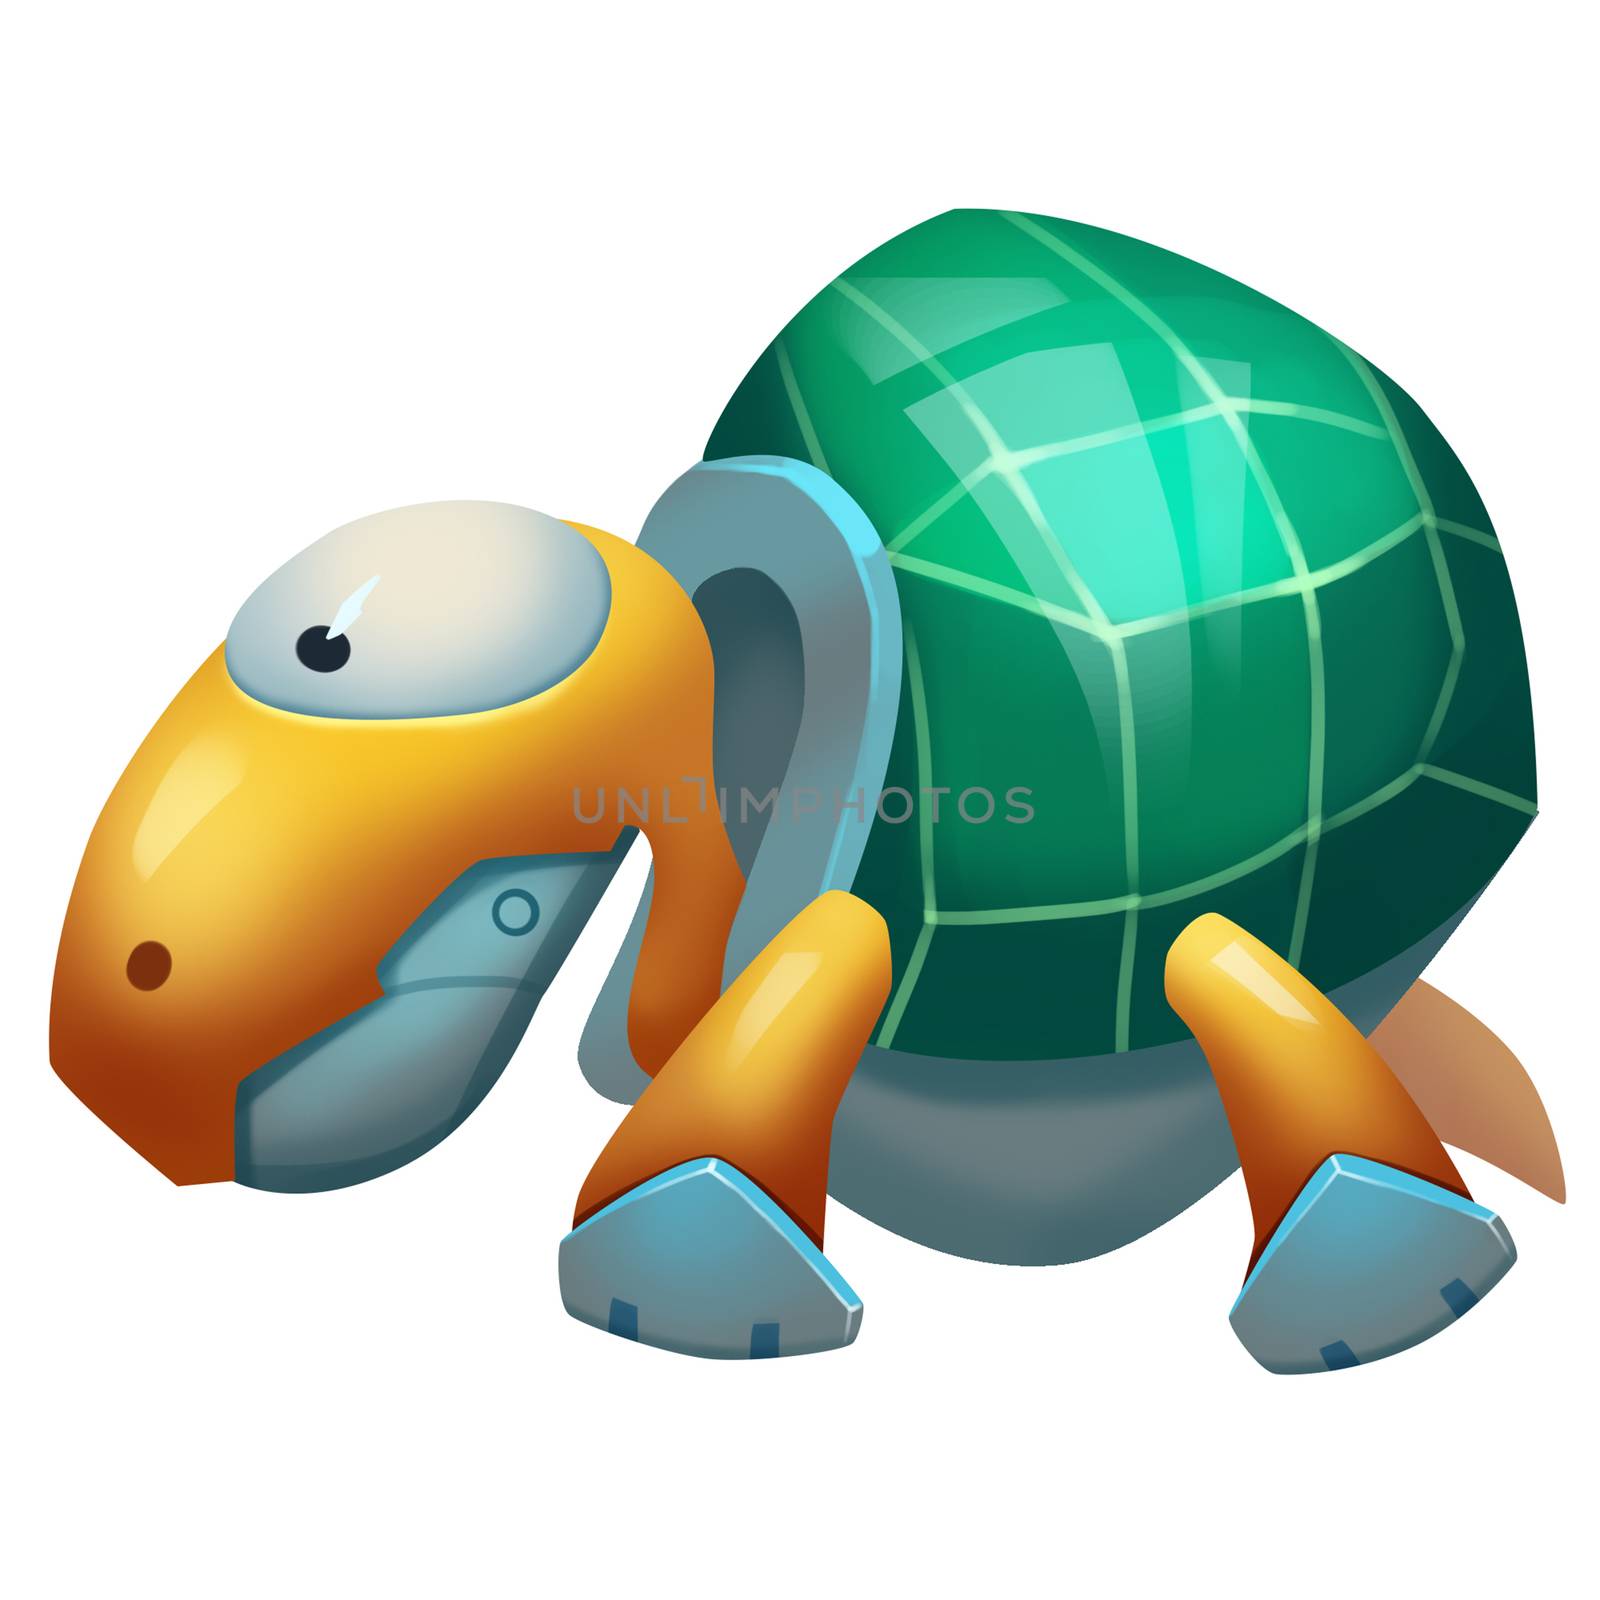 Illustration: Game World Topic - The Idle Turtle - Character Creation - Fantastic Style by NextMars